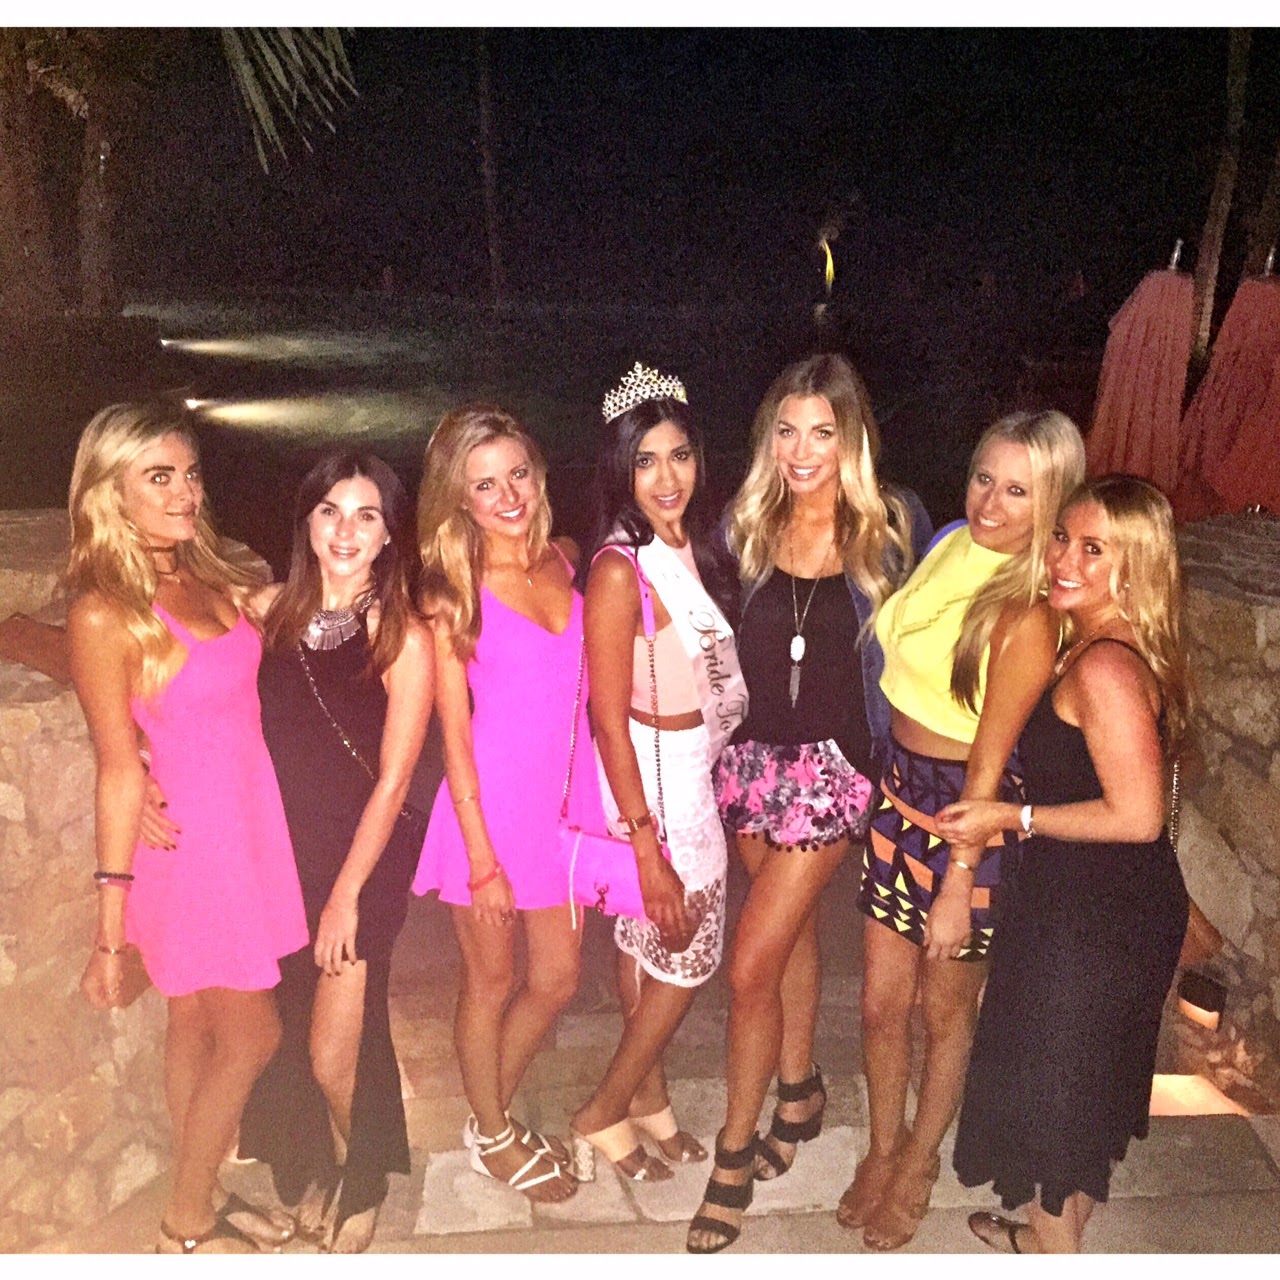 ChelseaGilson: A Bachelorette Party Weekend in Cabo - The Itinerary